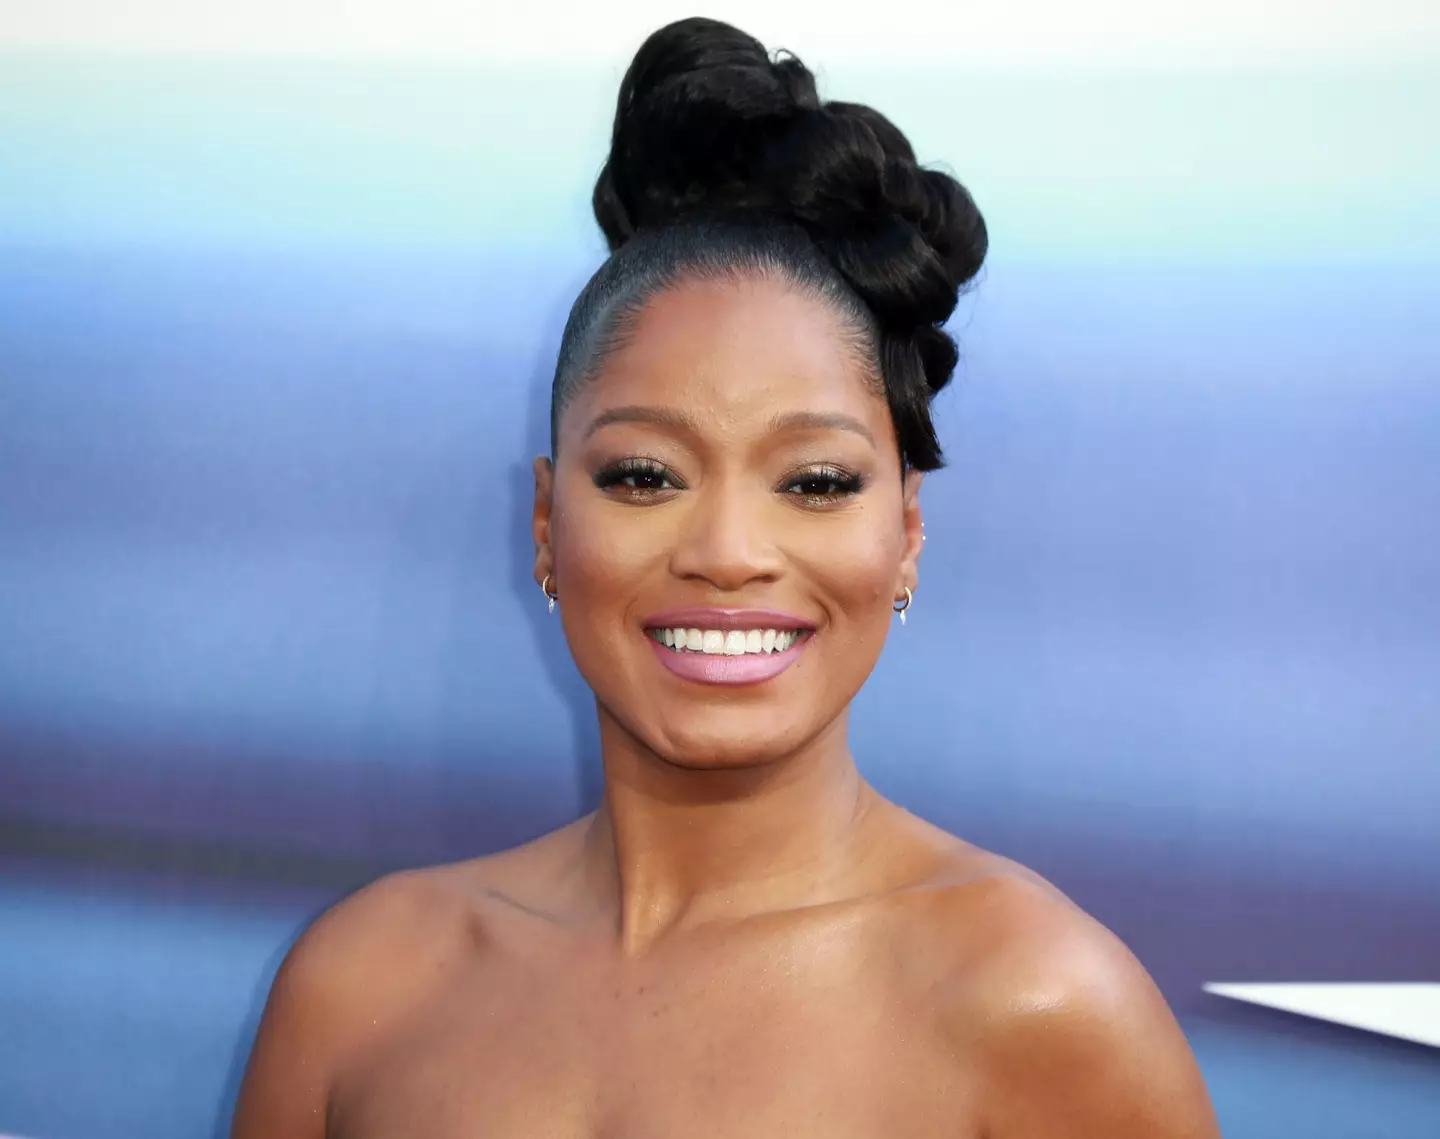 Keke Palmer at the UK premiere for Lightyear in London.